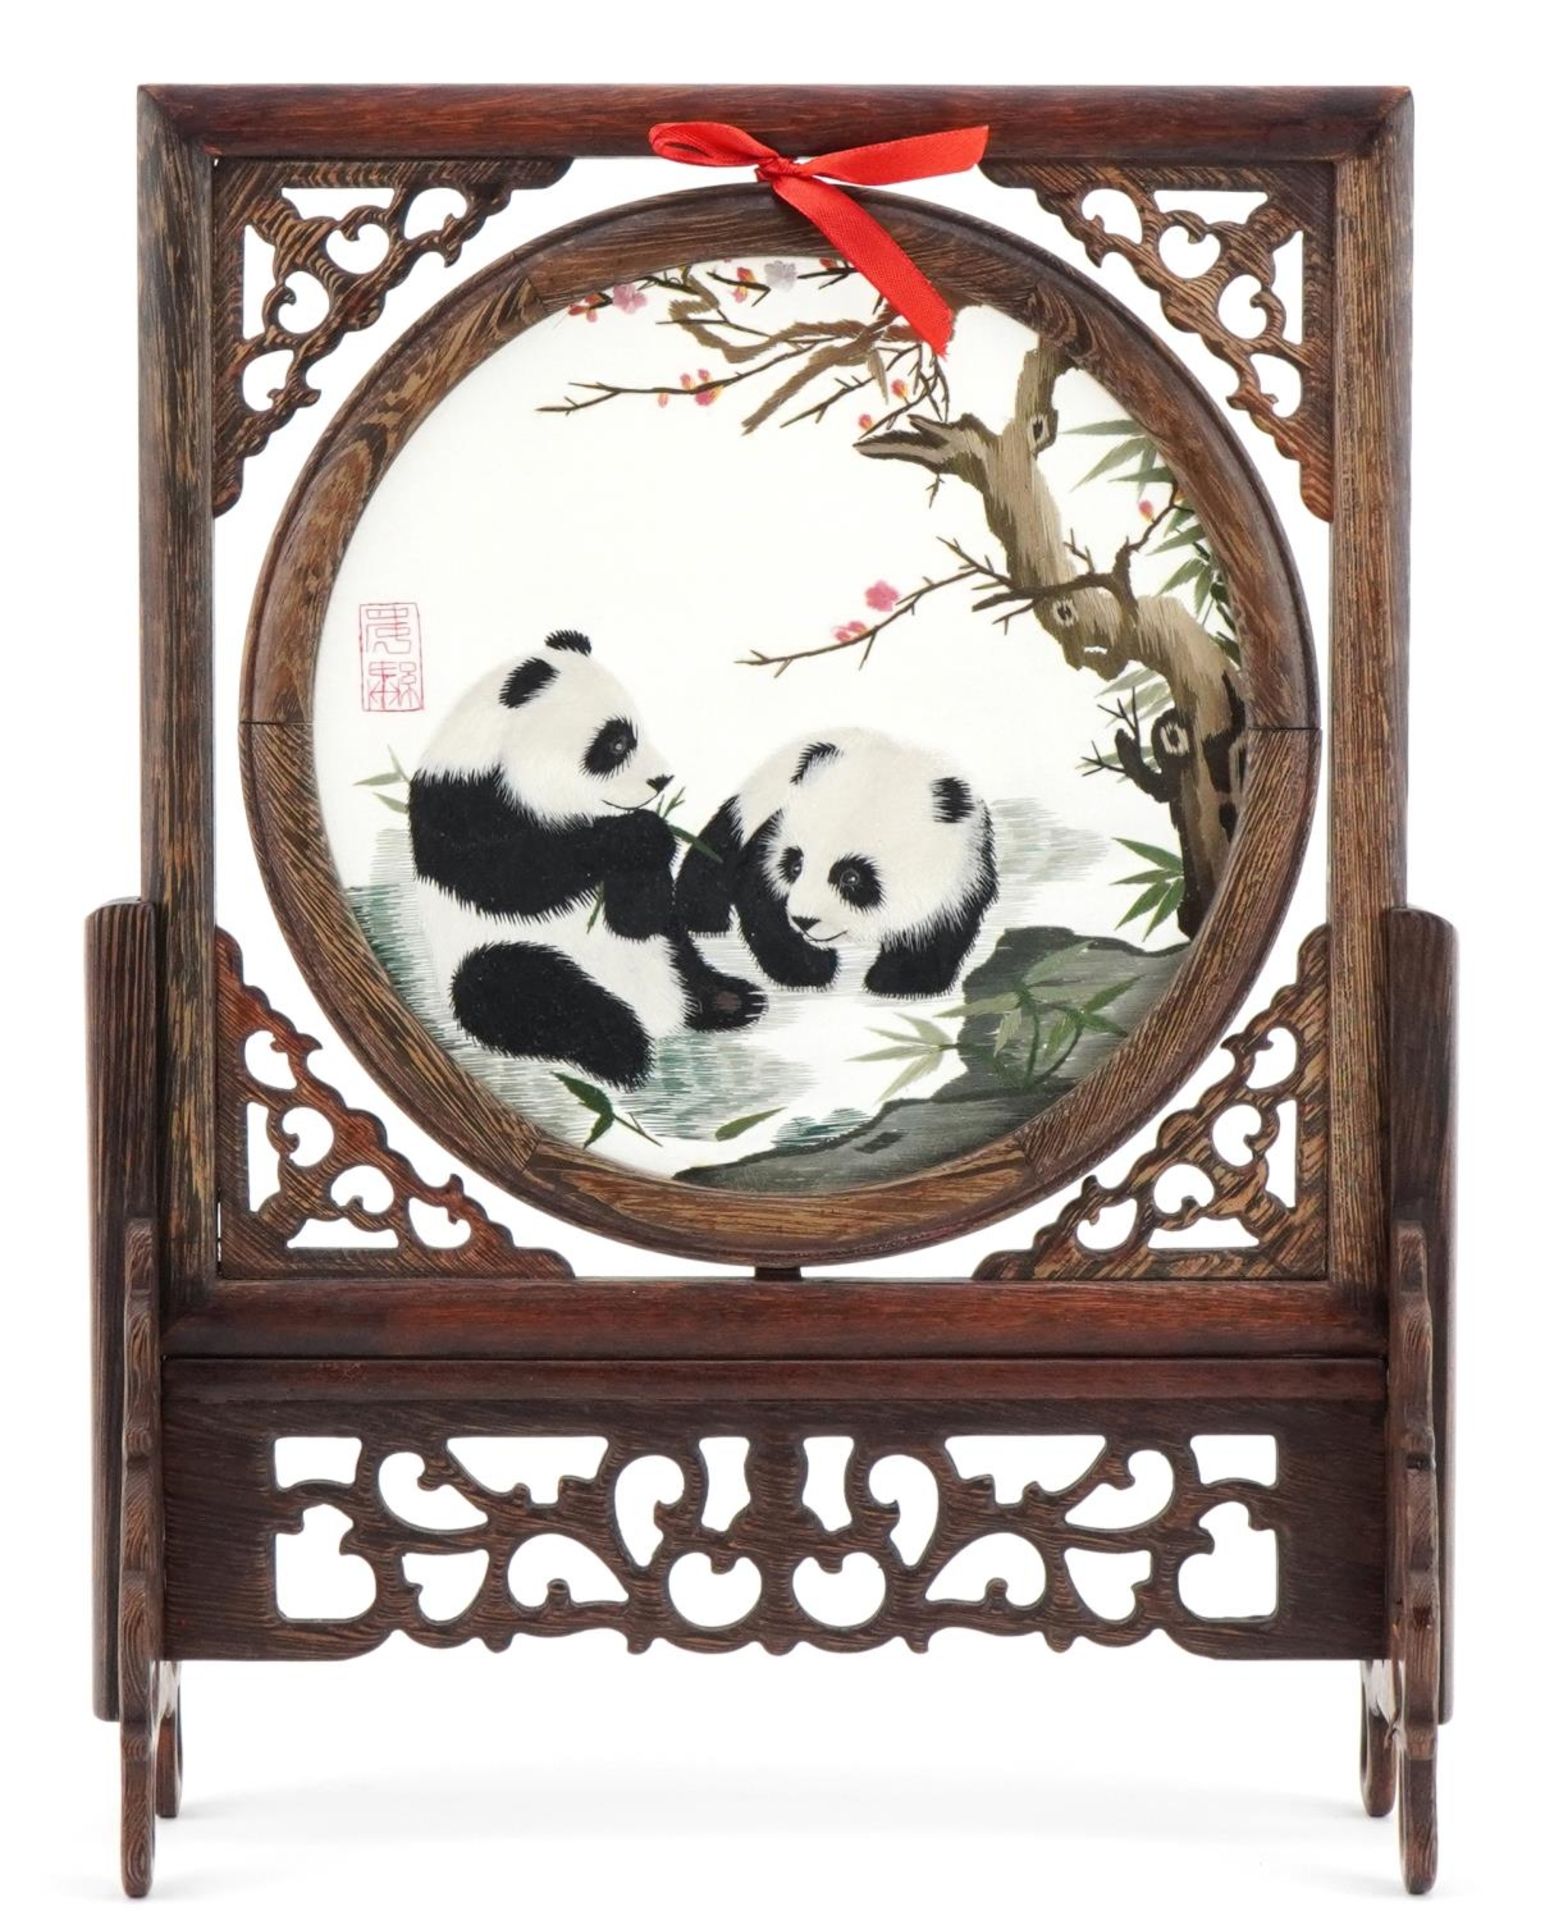 Chinese hardwood rotating table screen with silk panel embroidered with two pandas, signed with